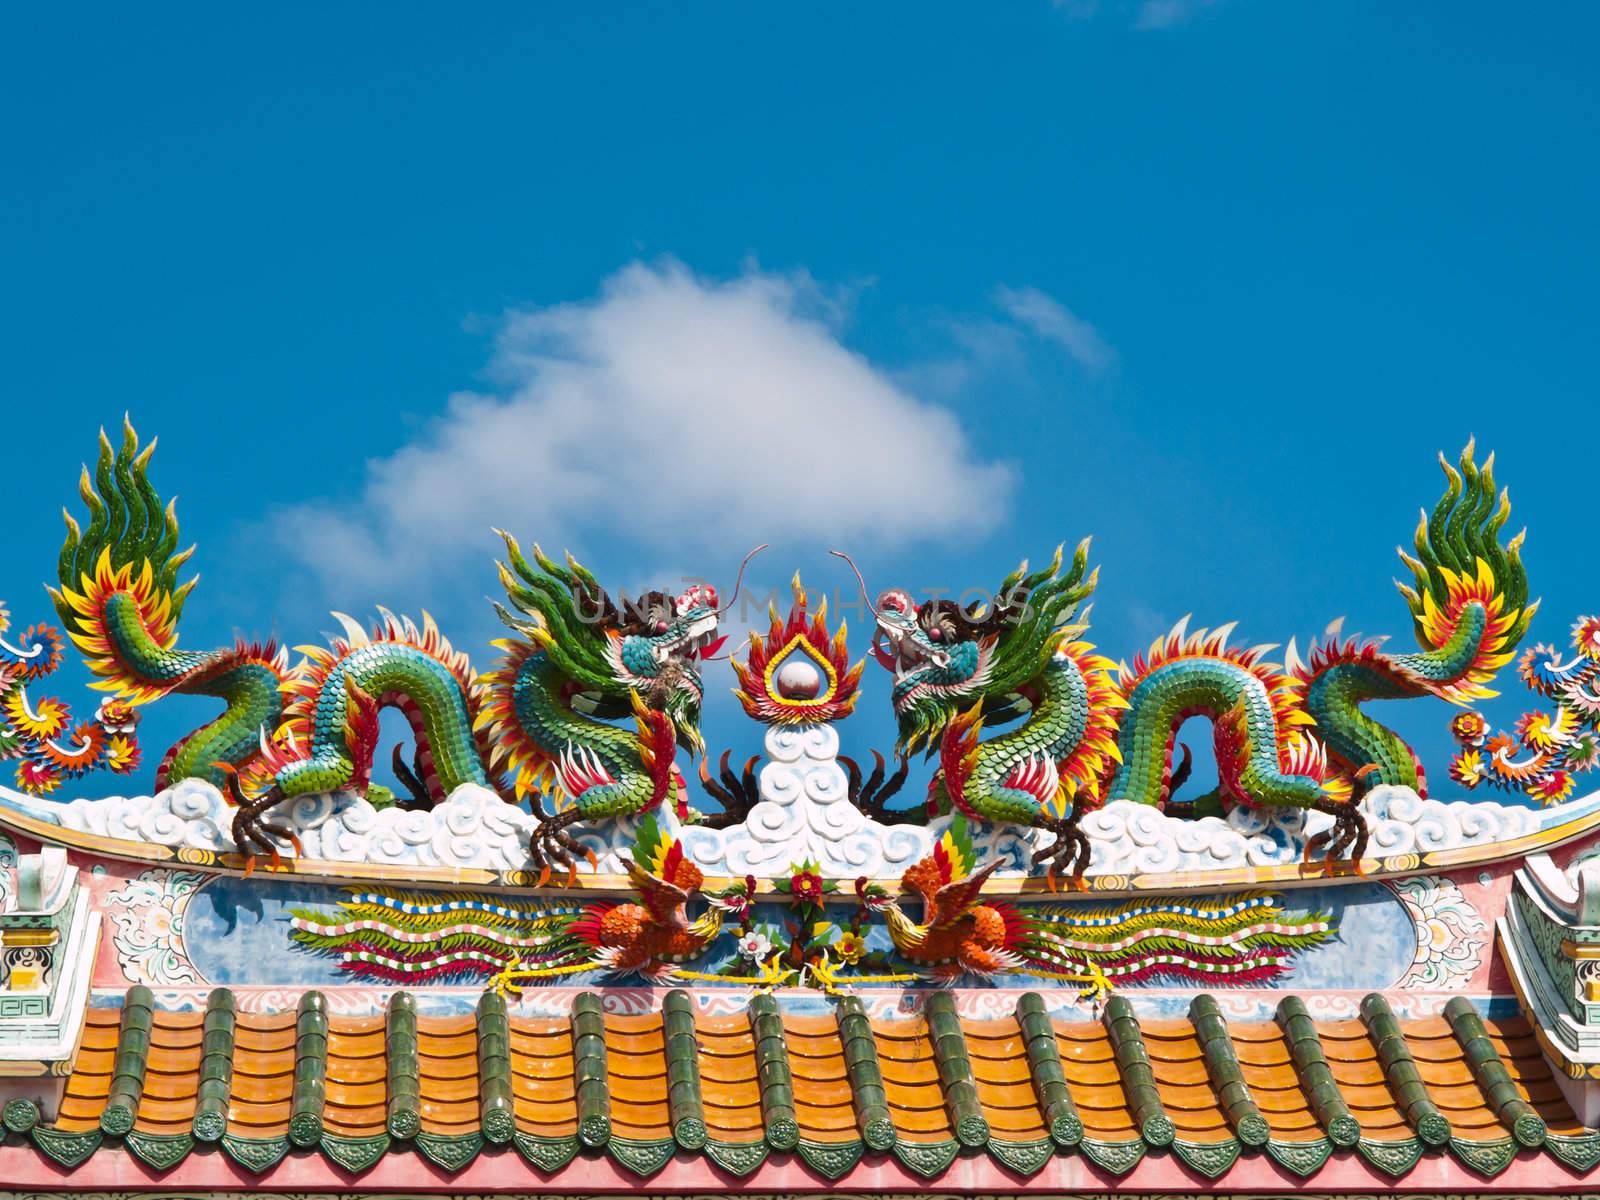 Dragon sculpture on roof of temple in Thailand